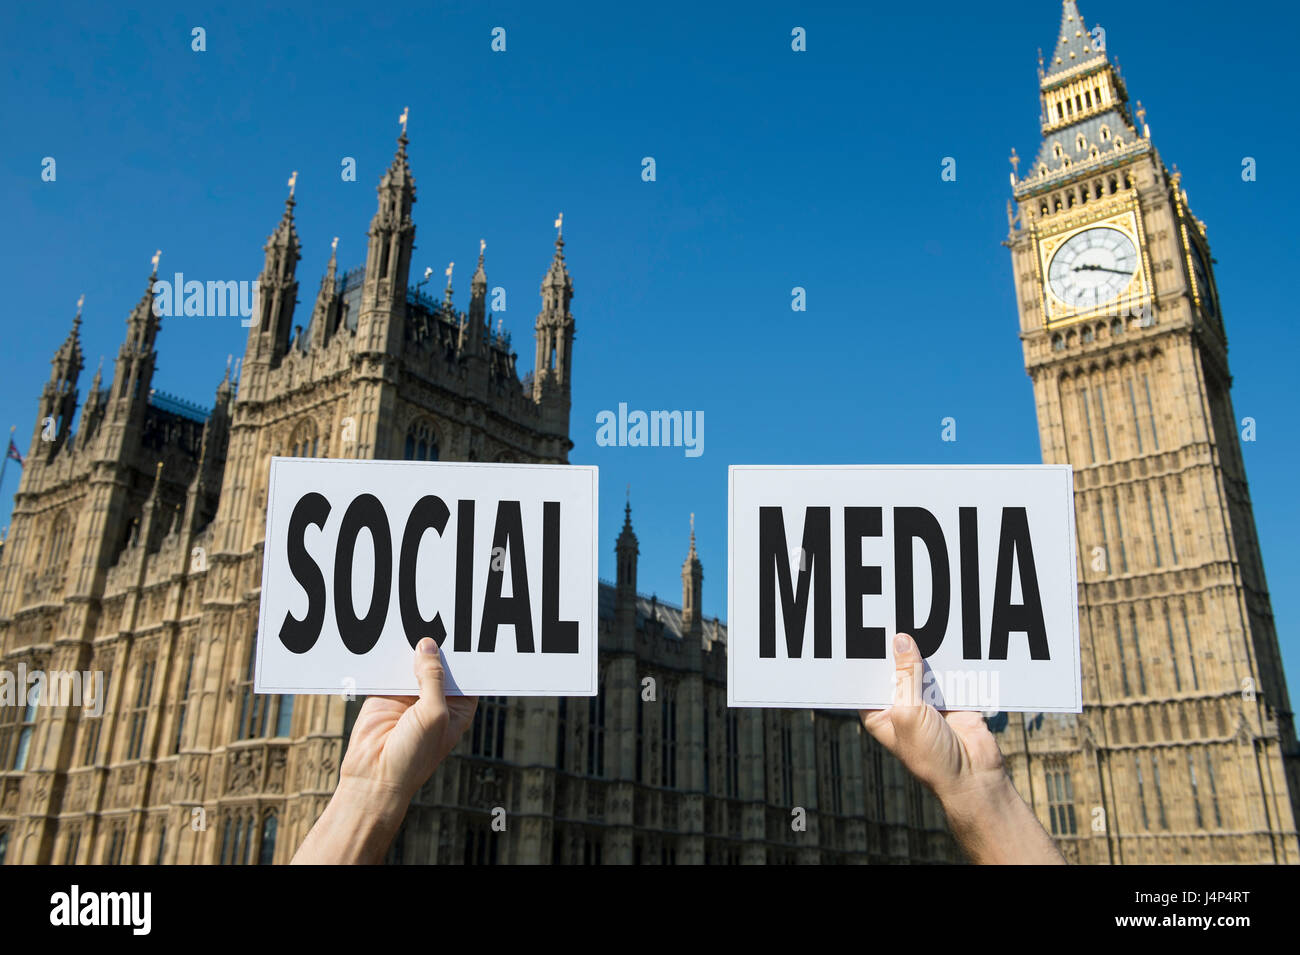 Hands holding up political signboards with the message Social Media in front of Houses of Parliament at Westminster Palace in London, UK Stock Photo